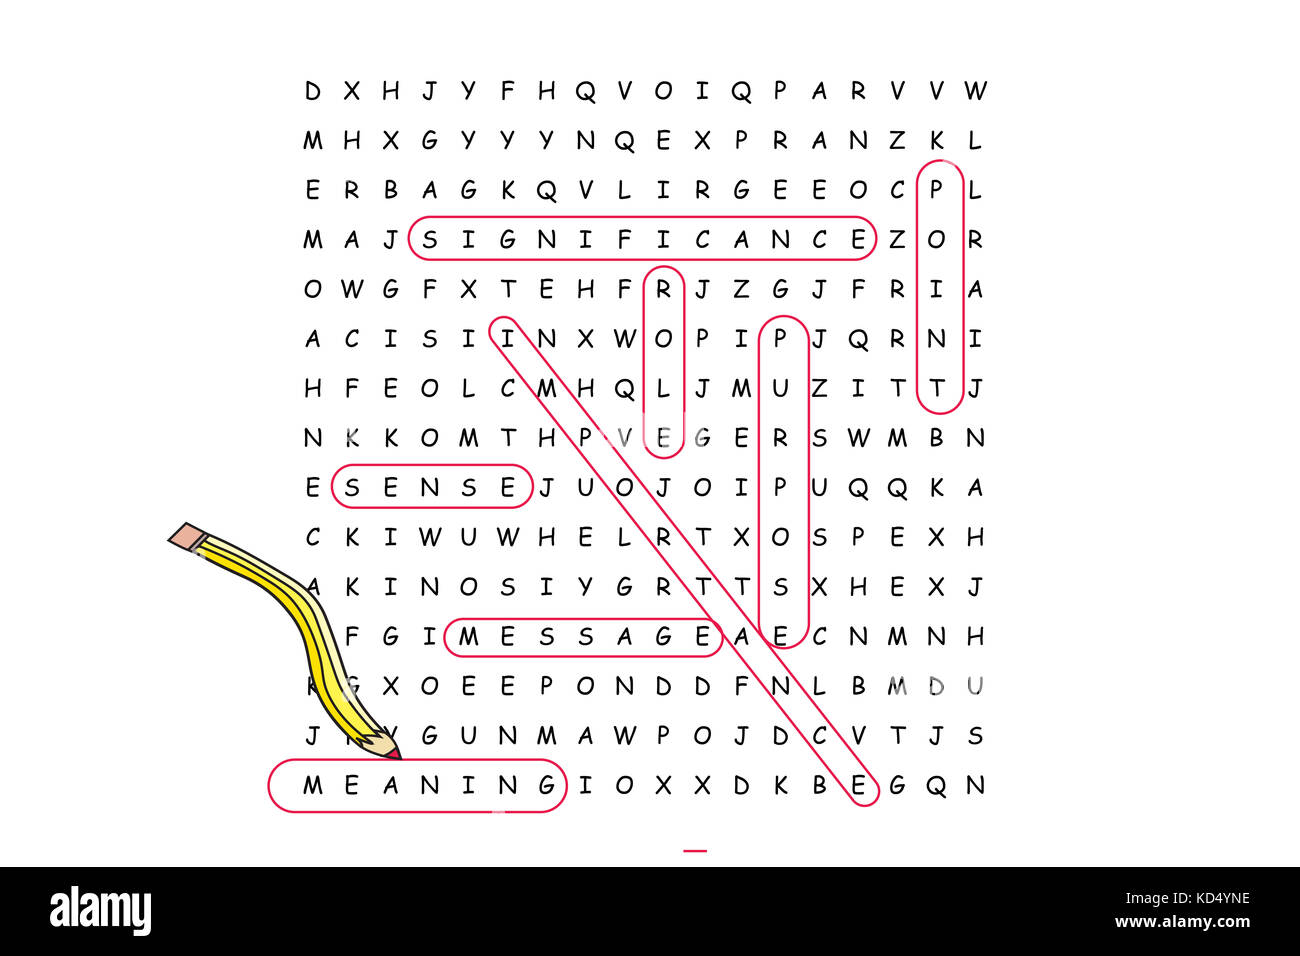 Word search puzzle with meaning and associated words circled in red pencil  Stock Photo - Alamy